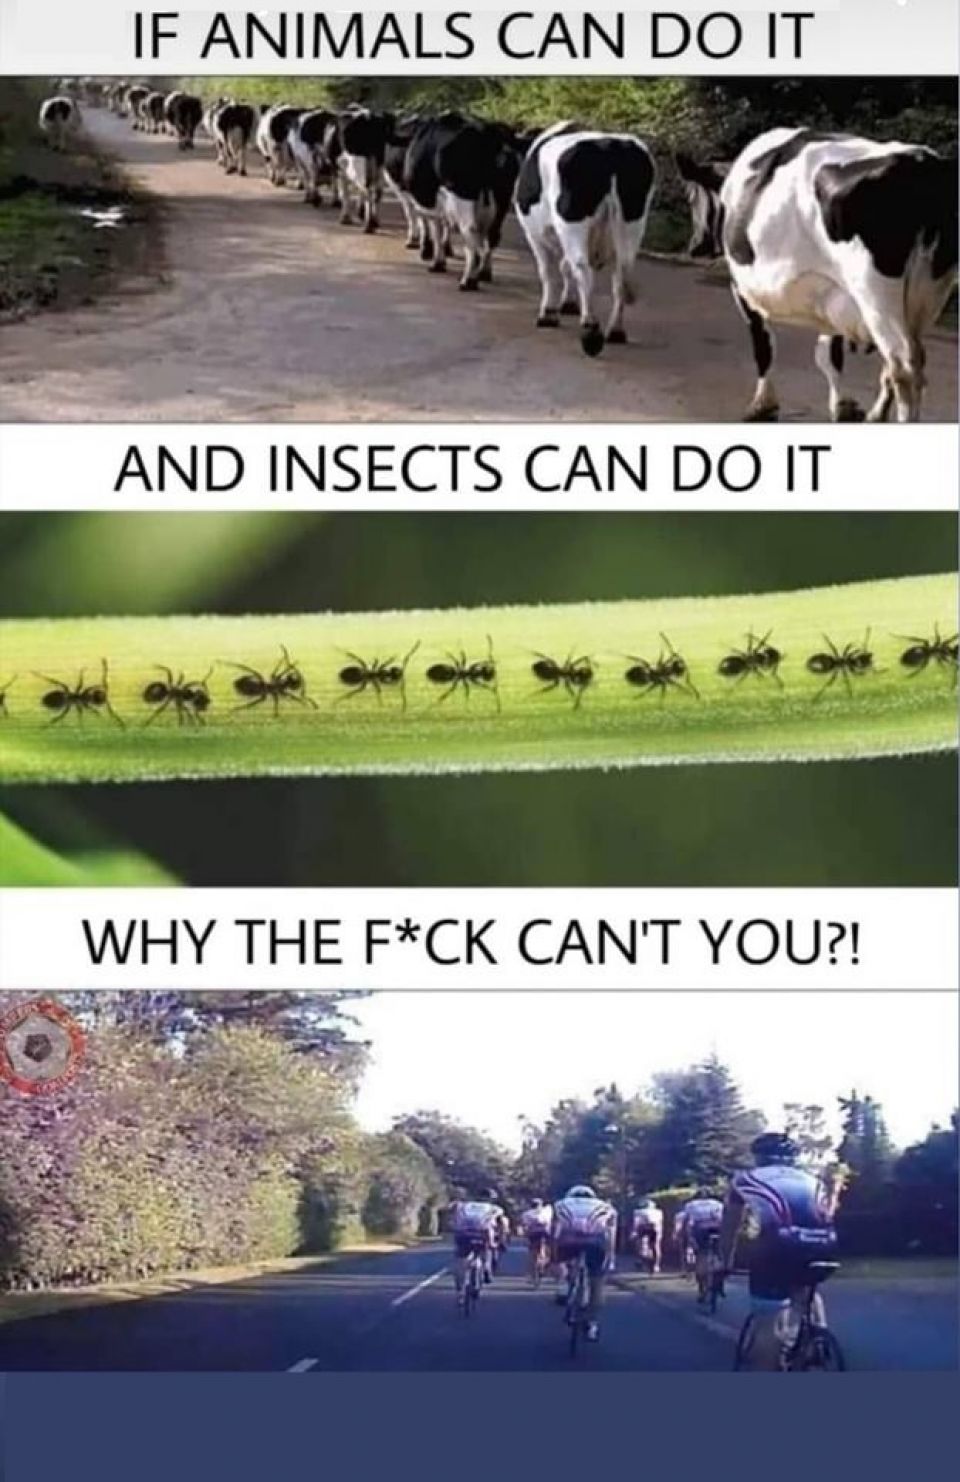 If animals can do it...